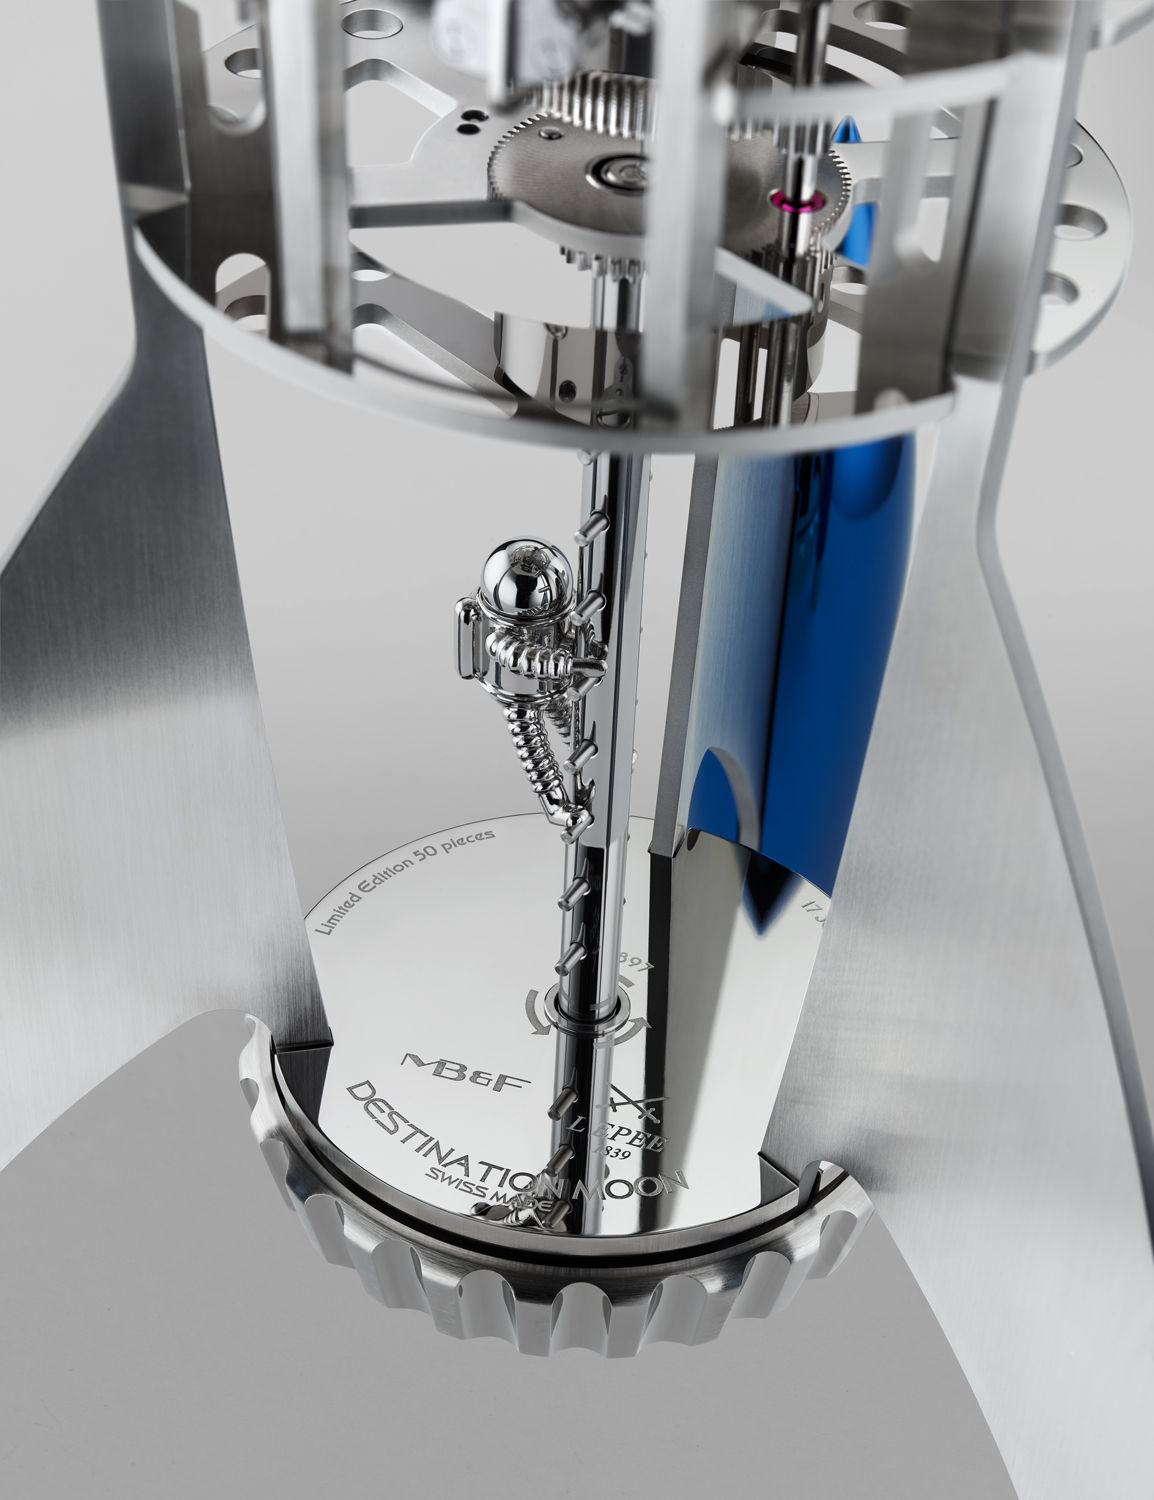 Splurge: Prepare for takeoff with MB&F’s “Destination Moon” table clock